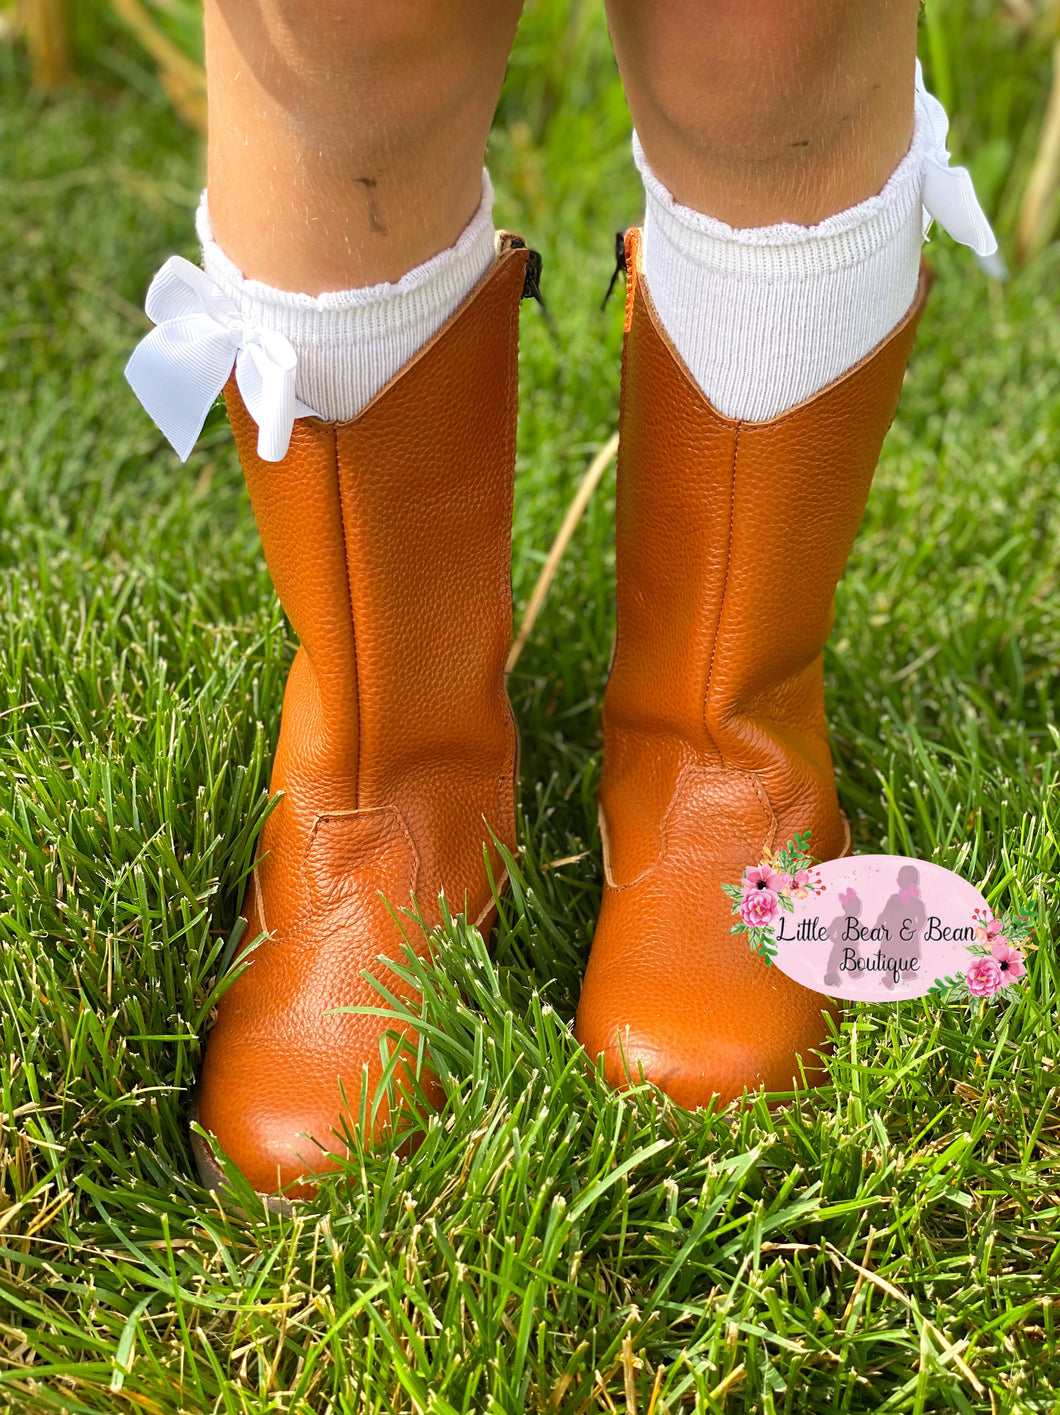 Brown Cowgirl Boots